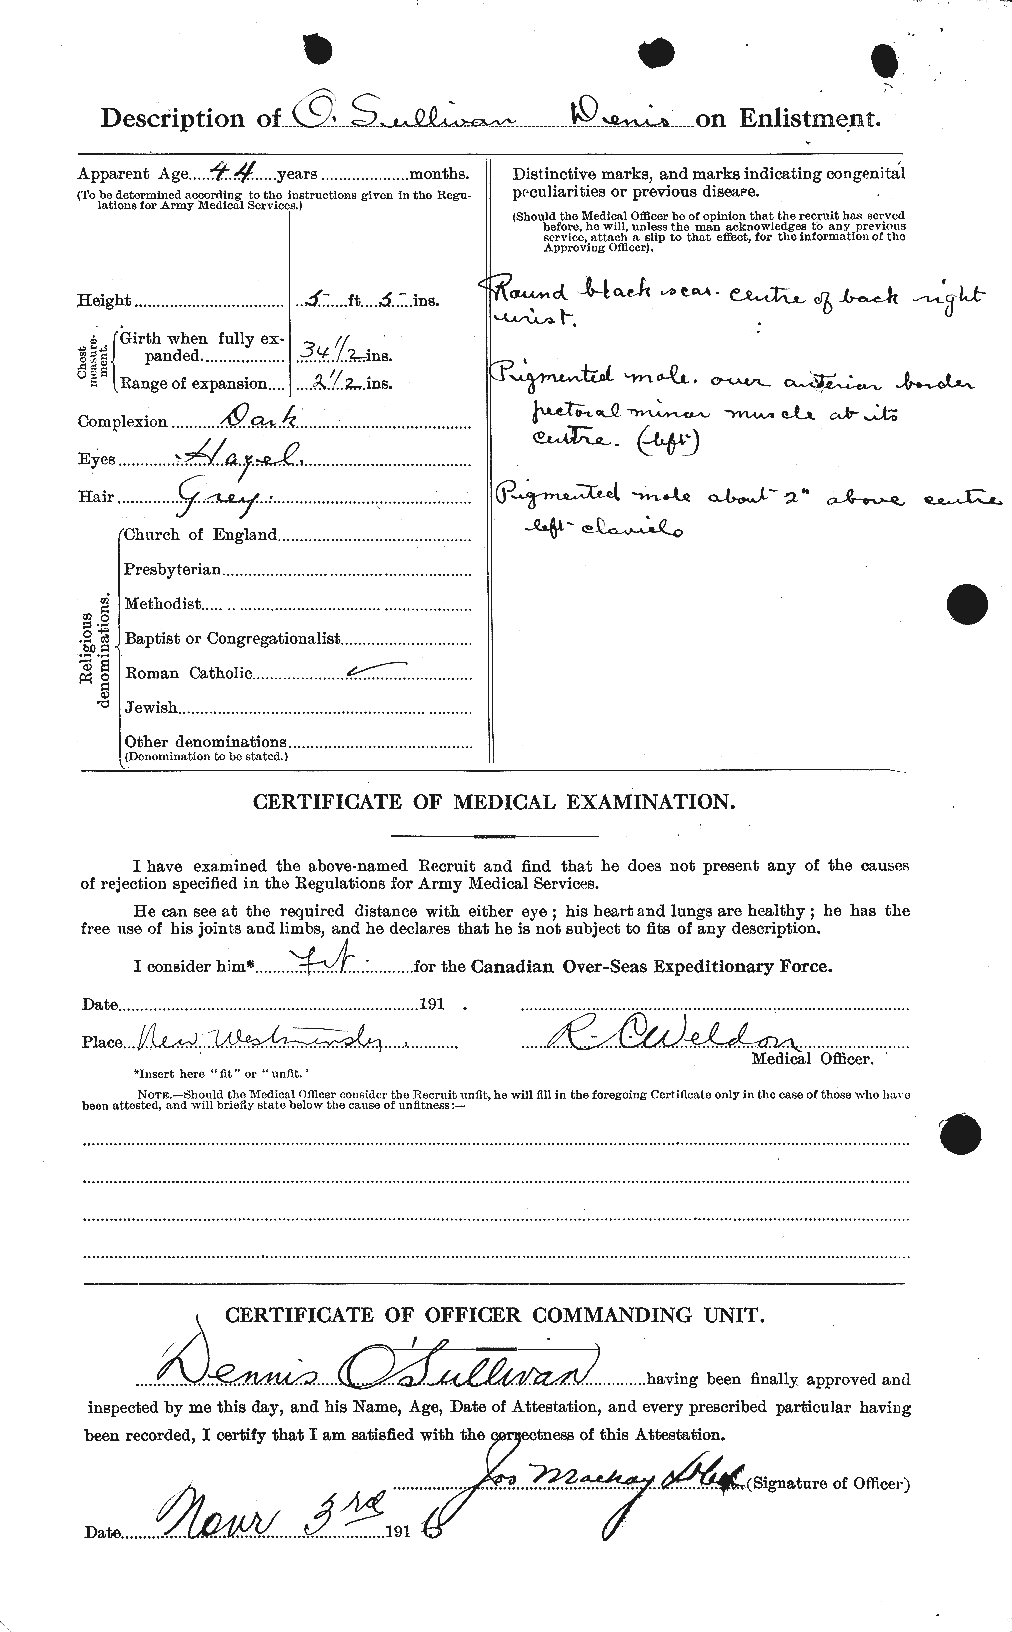 Personnel Records of the First World War - CEF 560308b